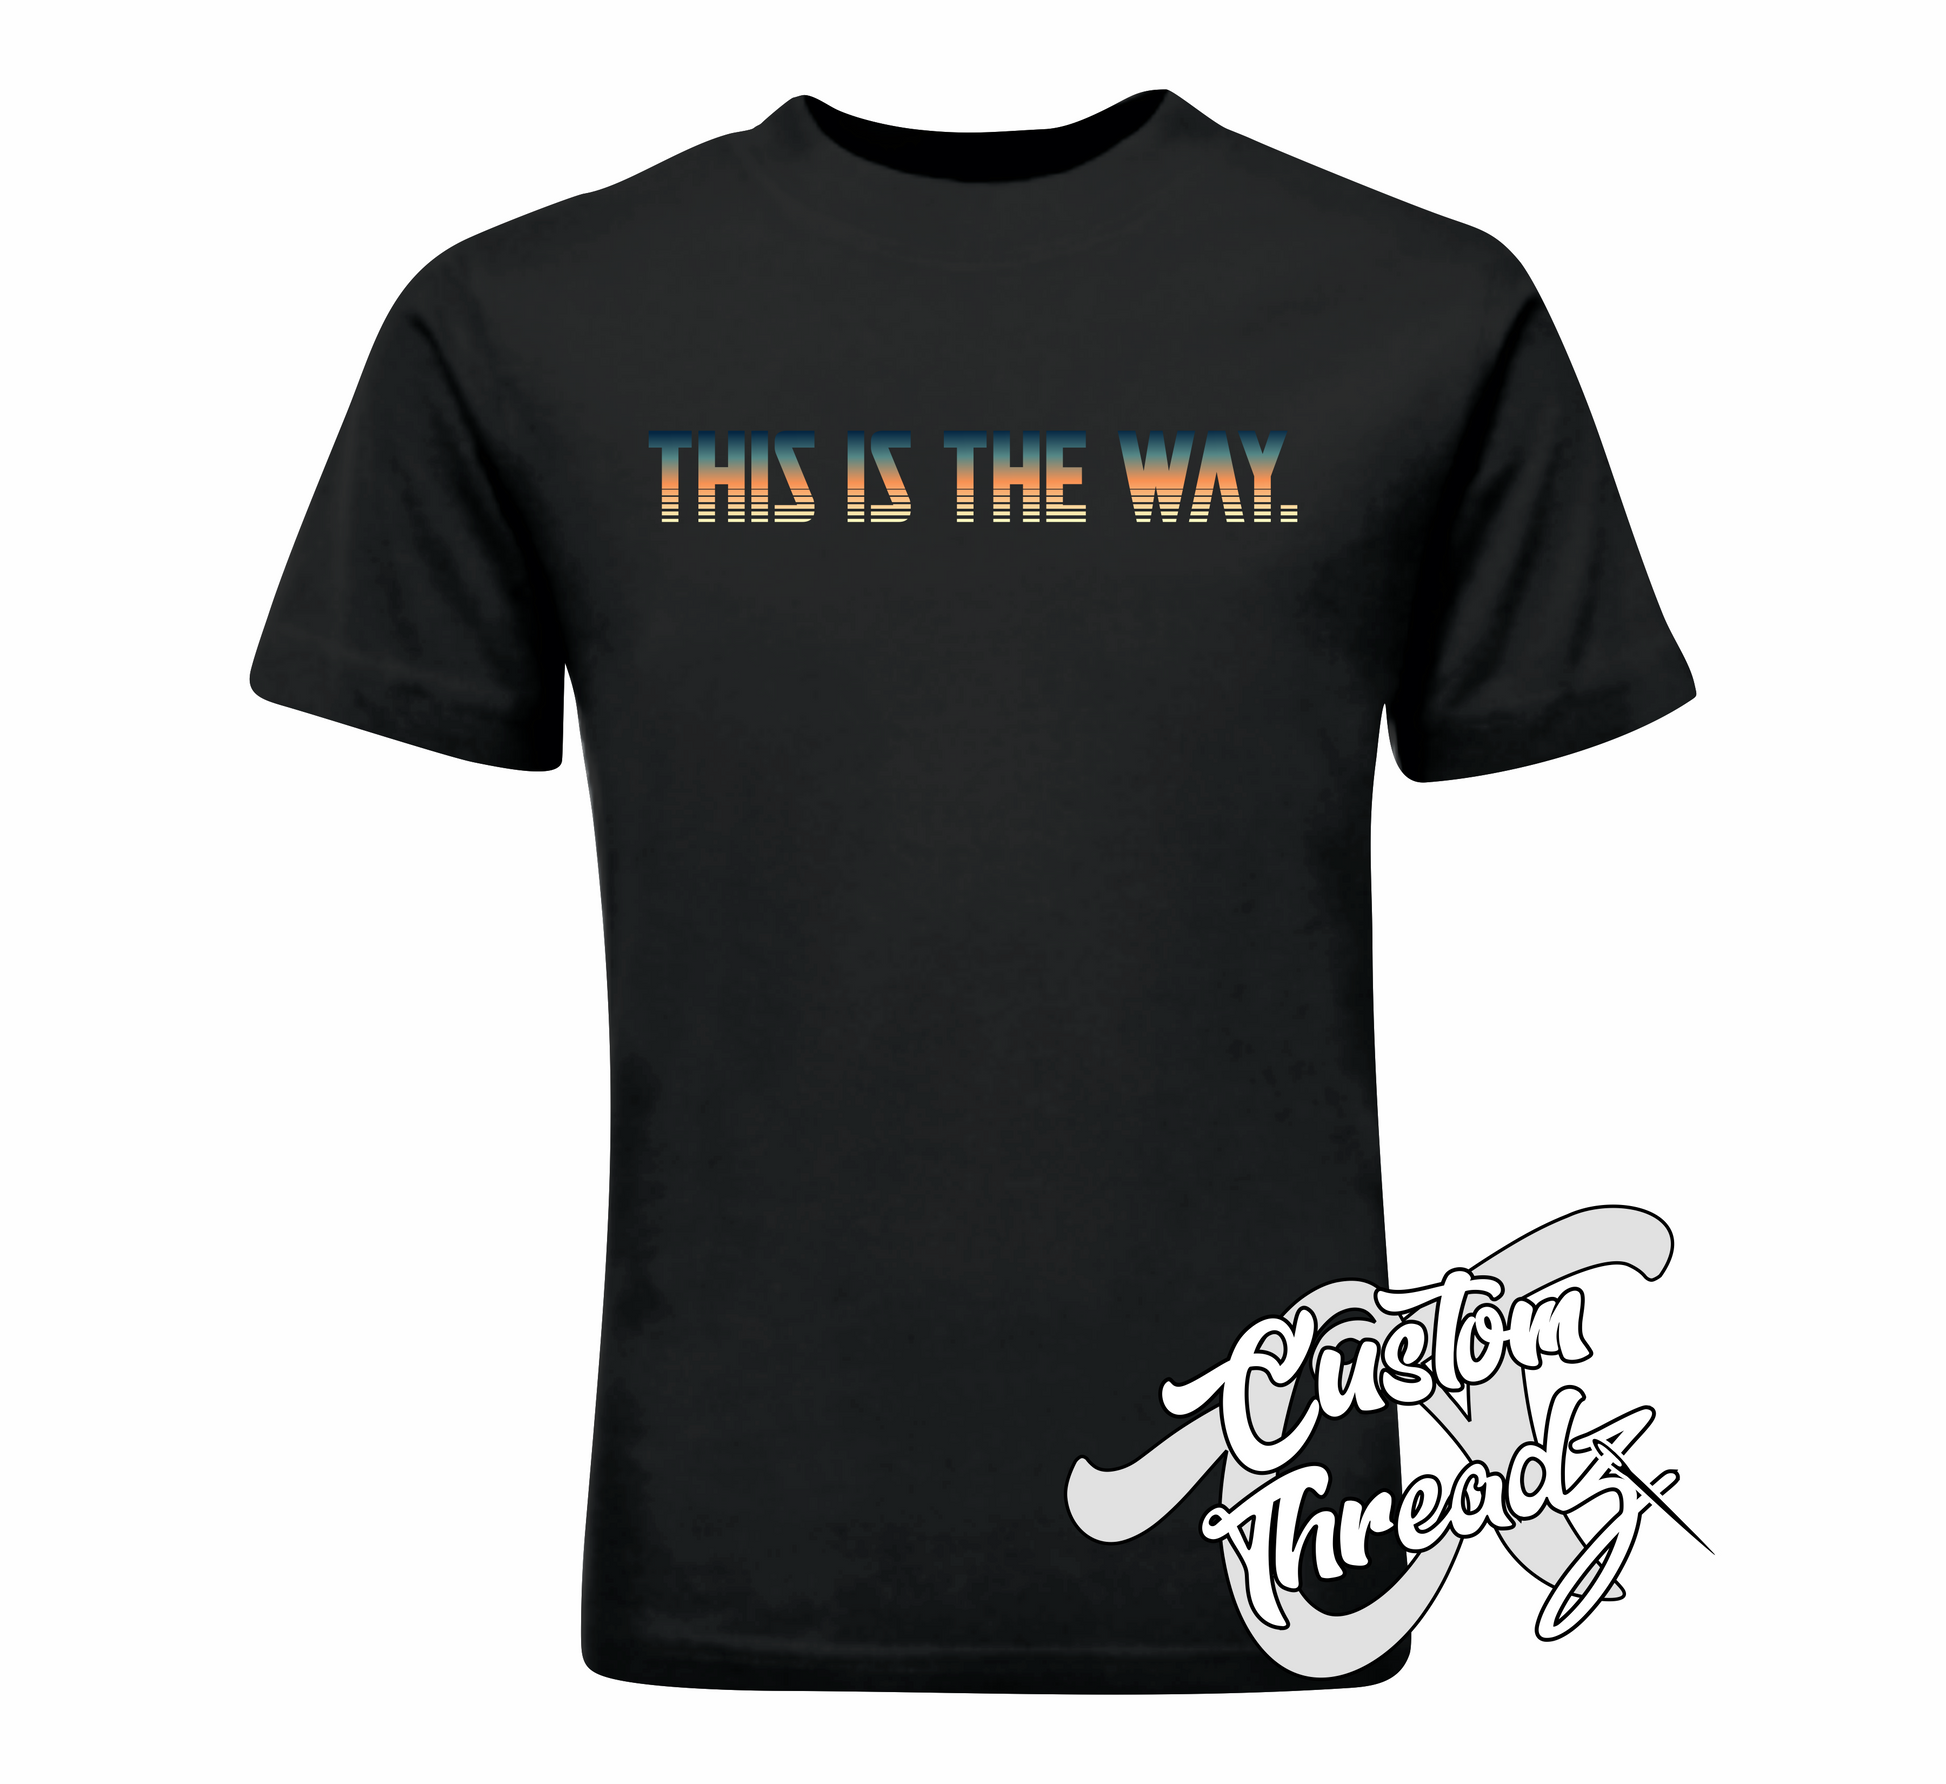 black youth tee with this is the way mandalorian star wars DTG printed design